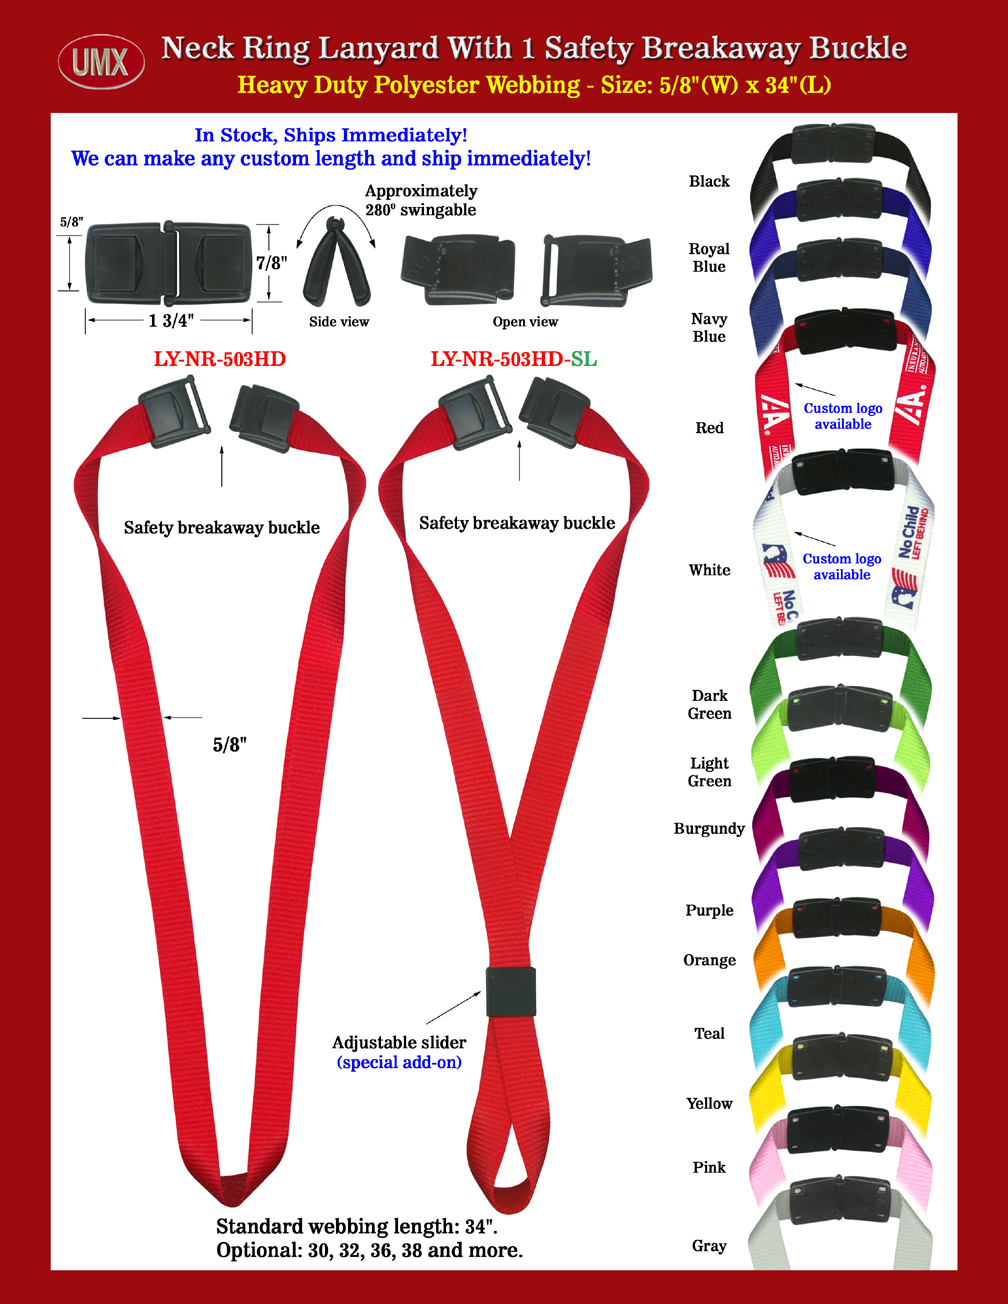 Not only used for name badges, IDs or ID card holders, neck rings, neck bands or neck strap lanyards are designed for a variety of applications, like carrying keys, tools, small meters, camera, cell phones and more.